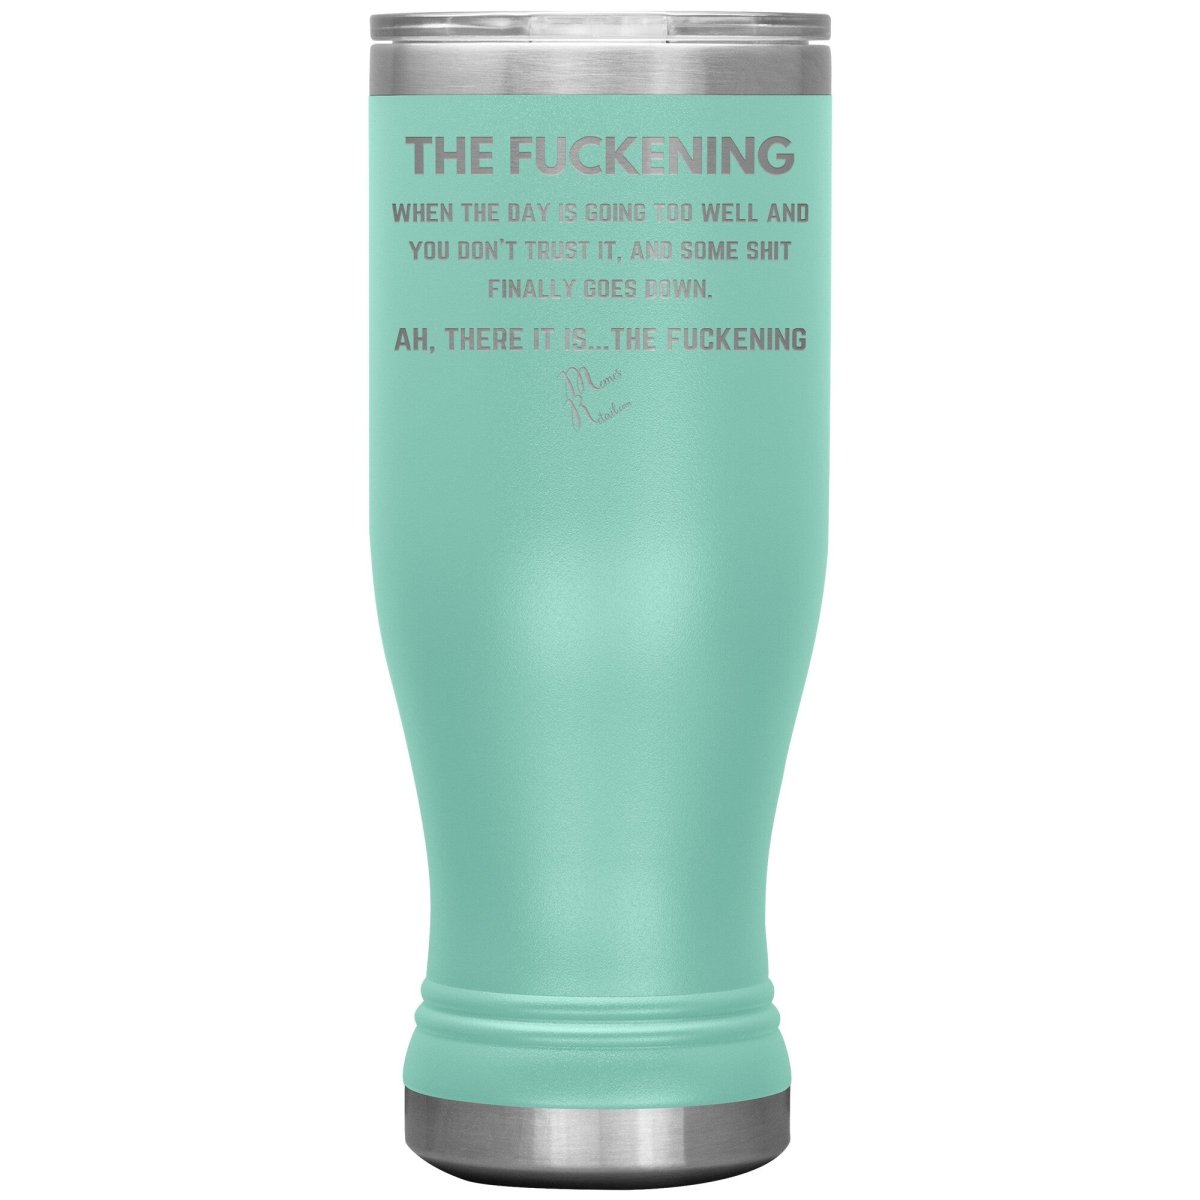 The Fuckening, When you don't trust the day Tumblers, 20oz BOHO Insulated Tumbler / Teal - MemesRetail.com